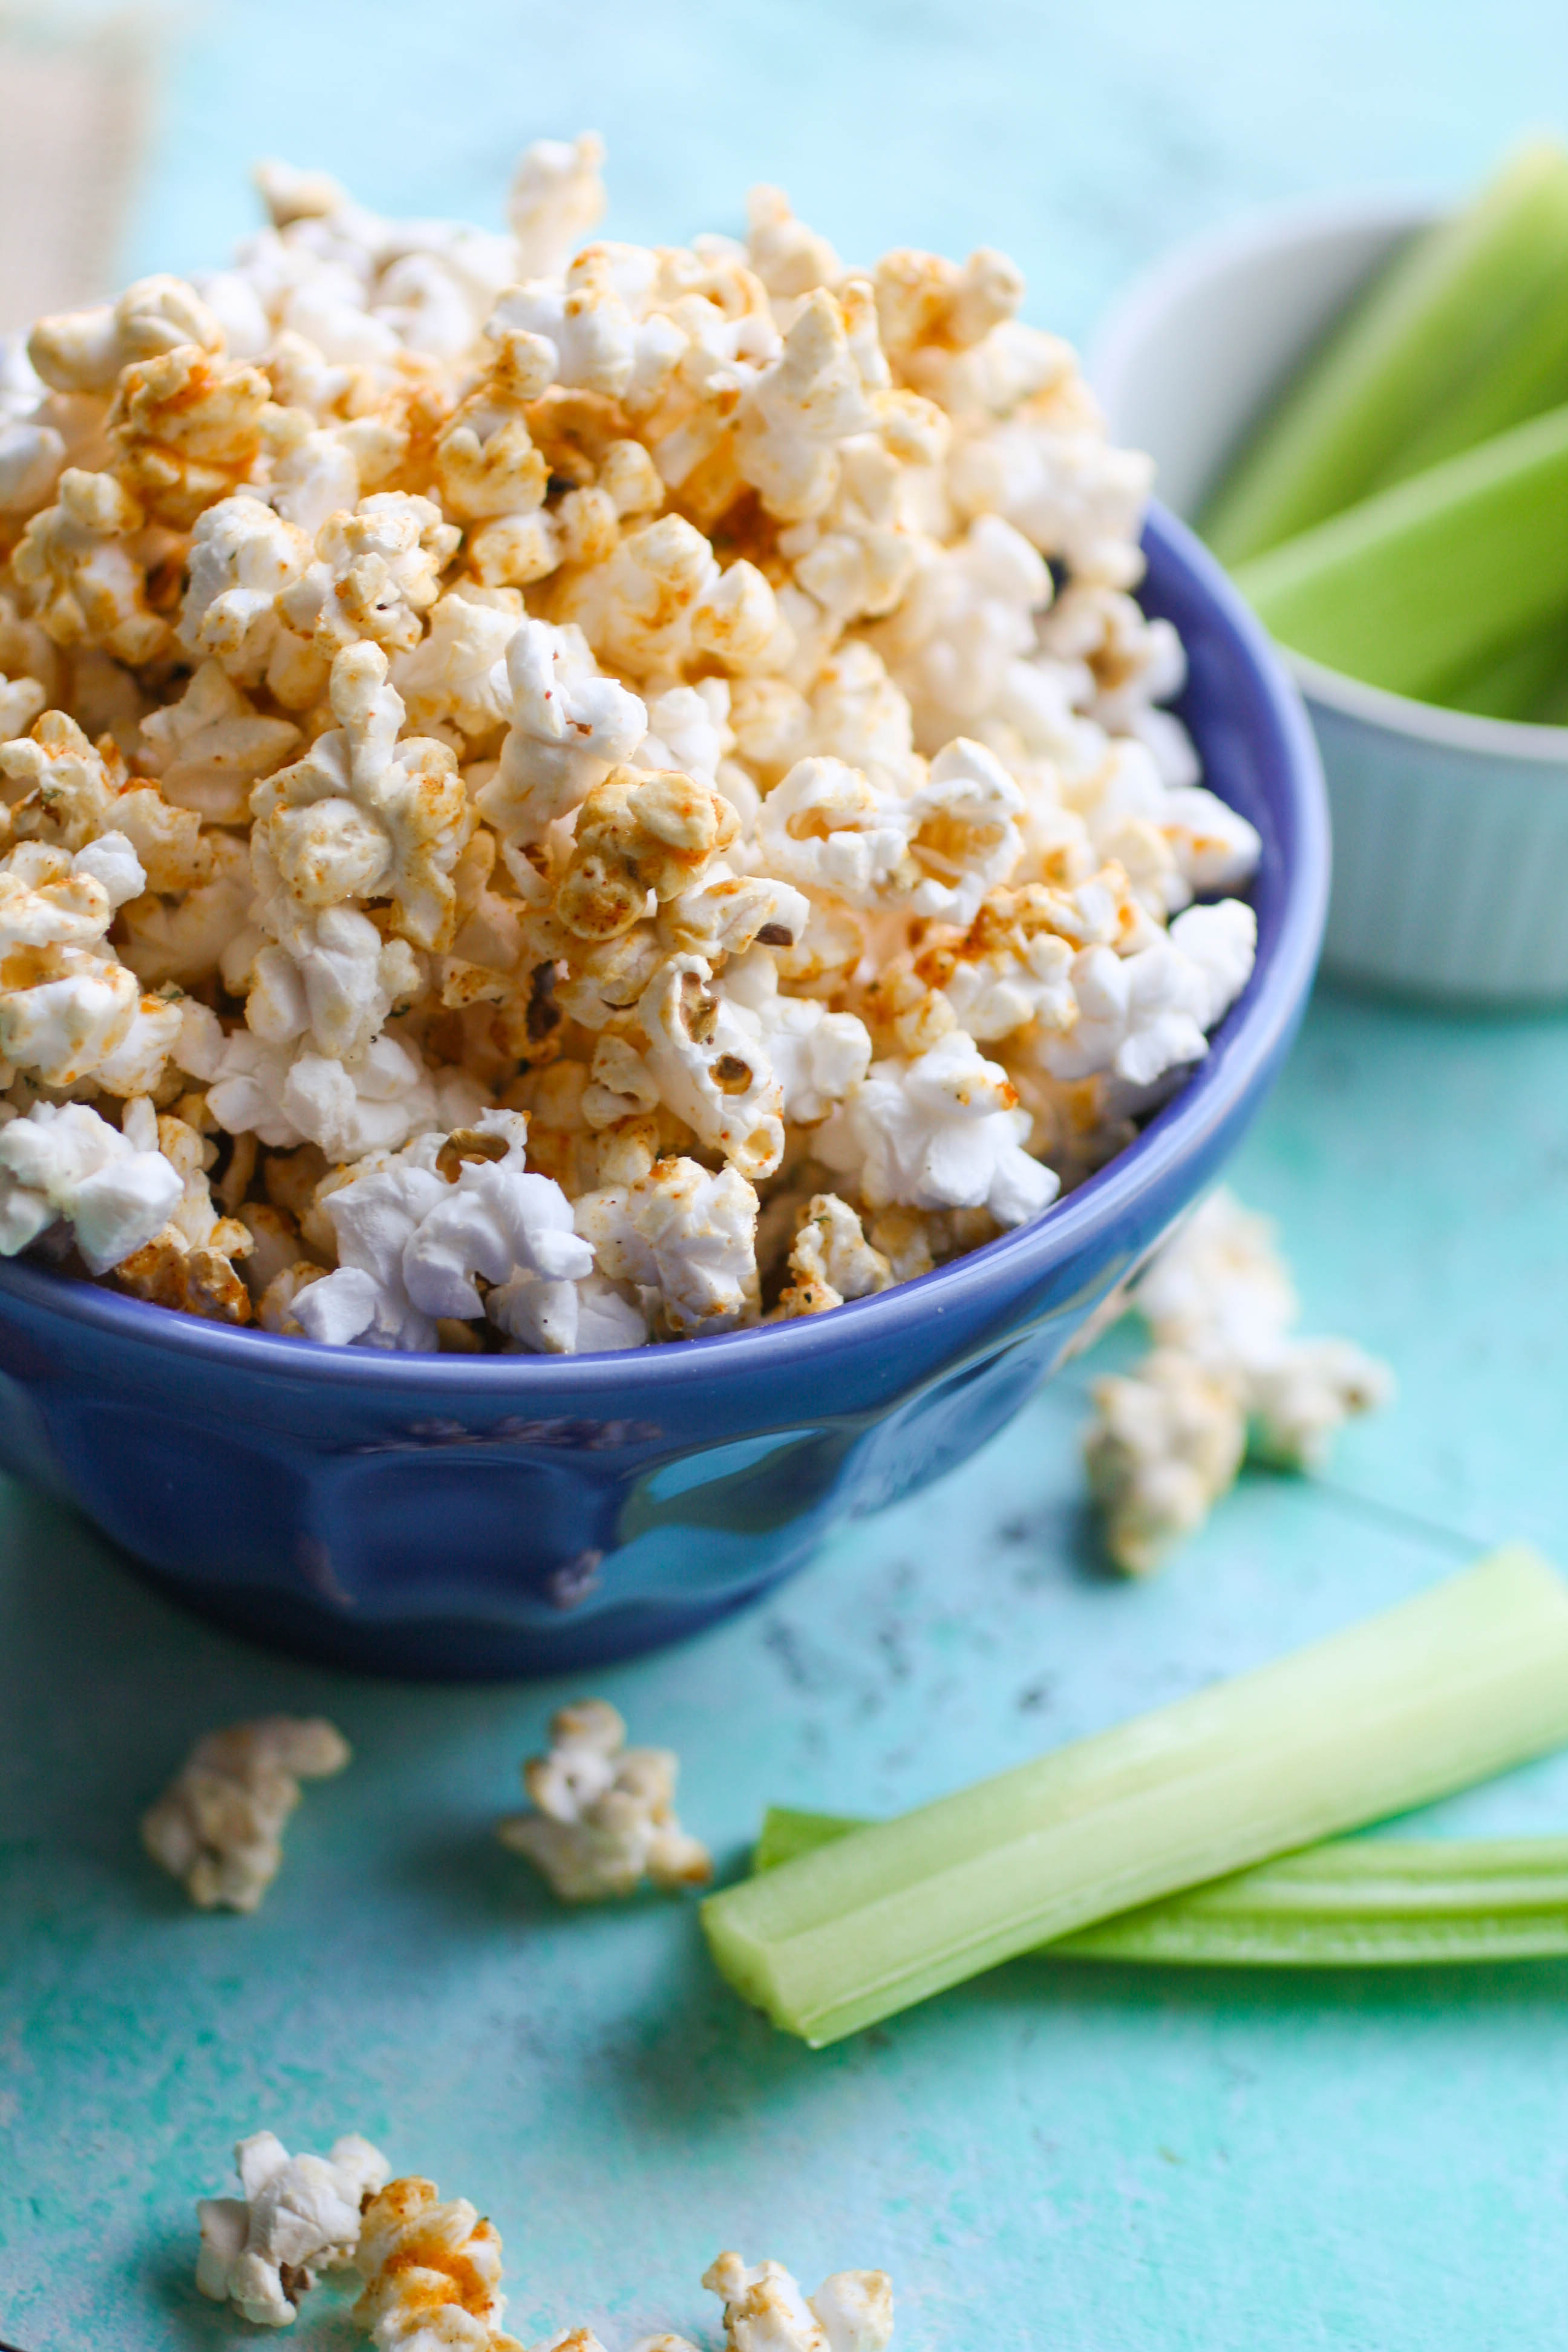 3 DIY Brown Paper Bag Microwave Popcorn Treats are easy to make. You'll love these fun snack flavors!